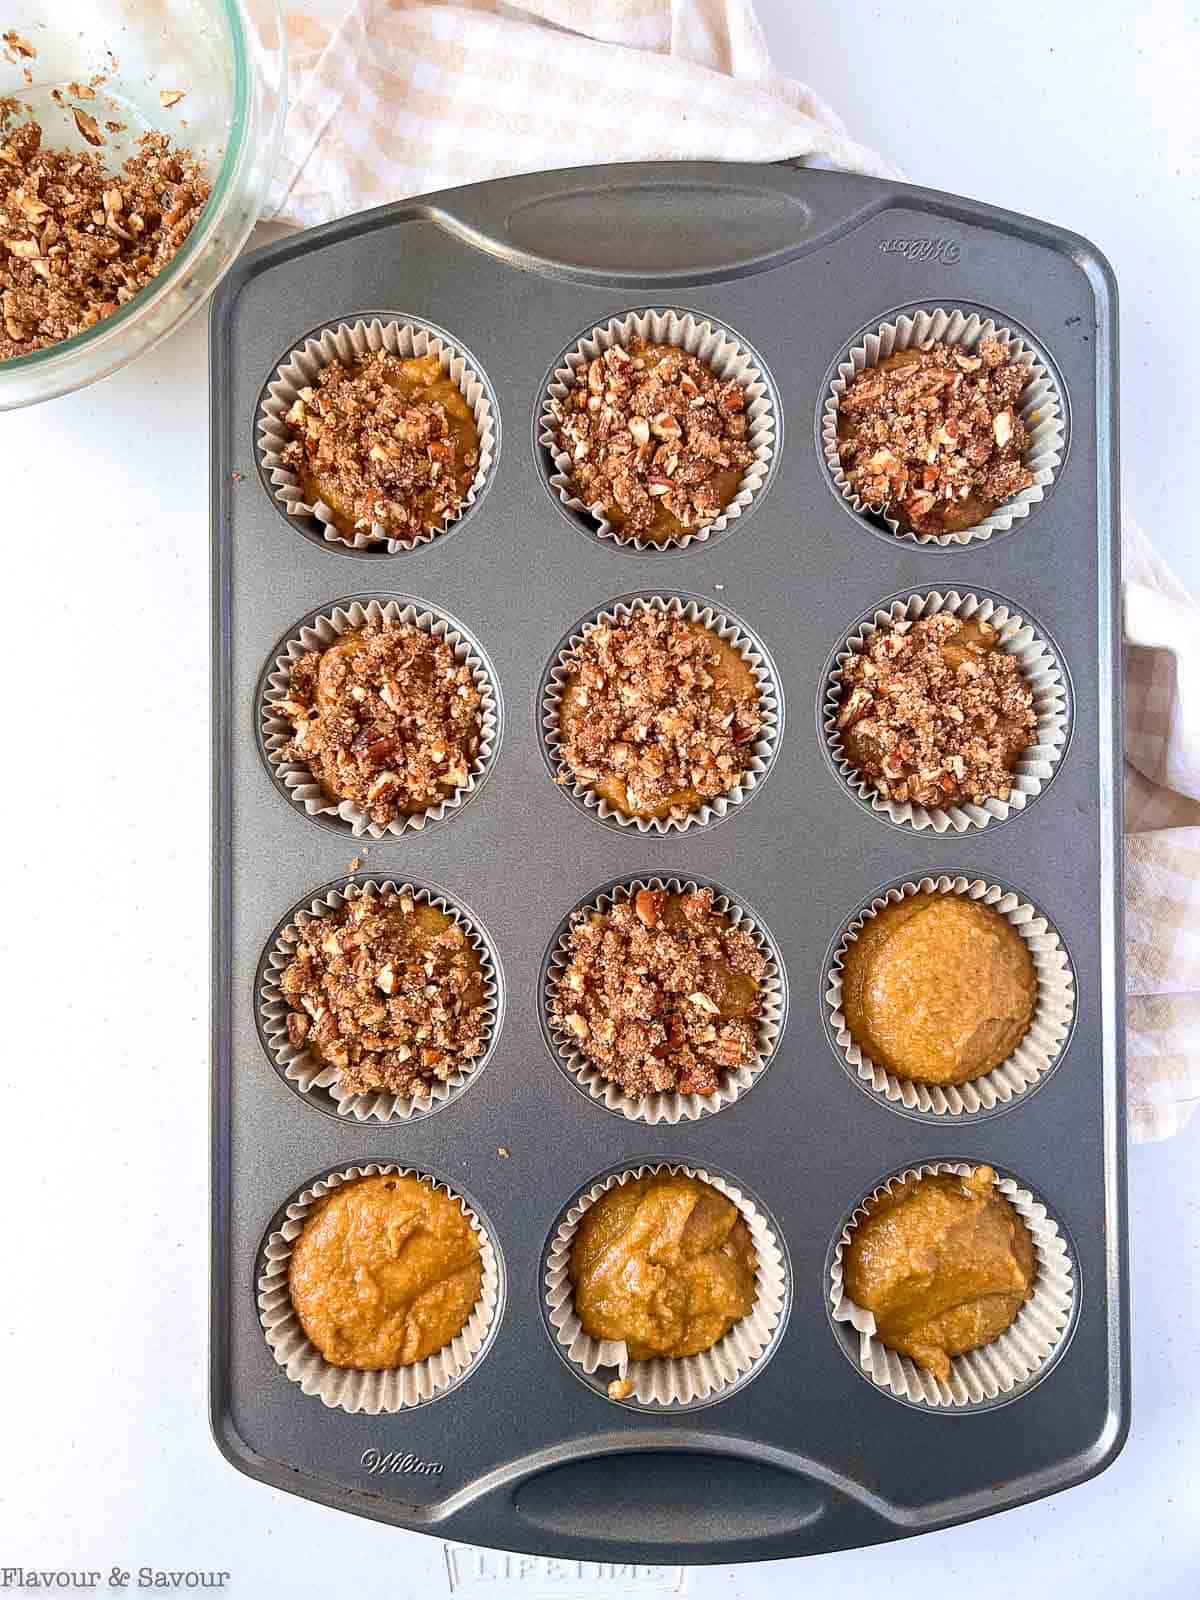 Adding streusel topping to pumpkin muffin batter in muffin tin.